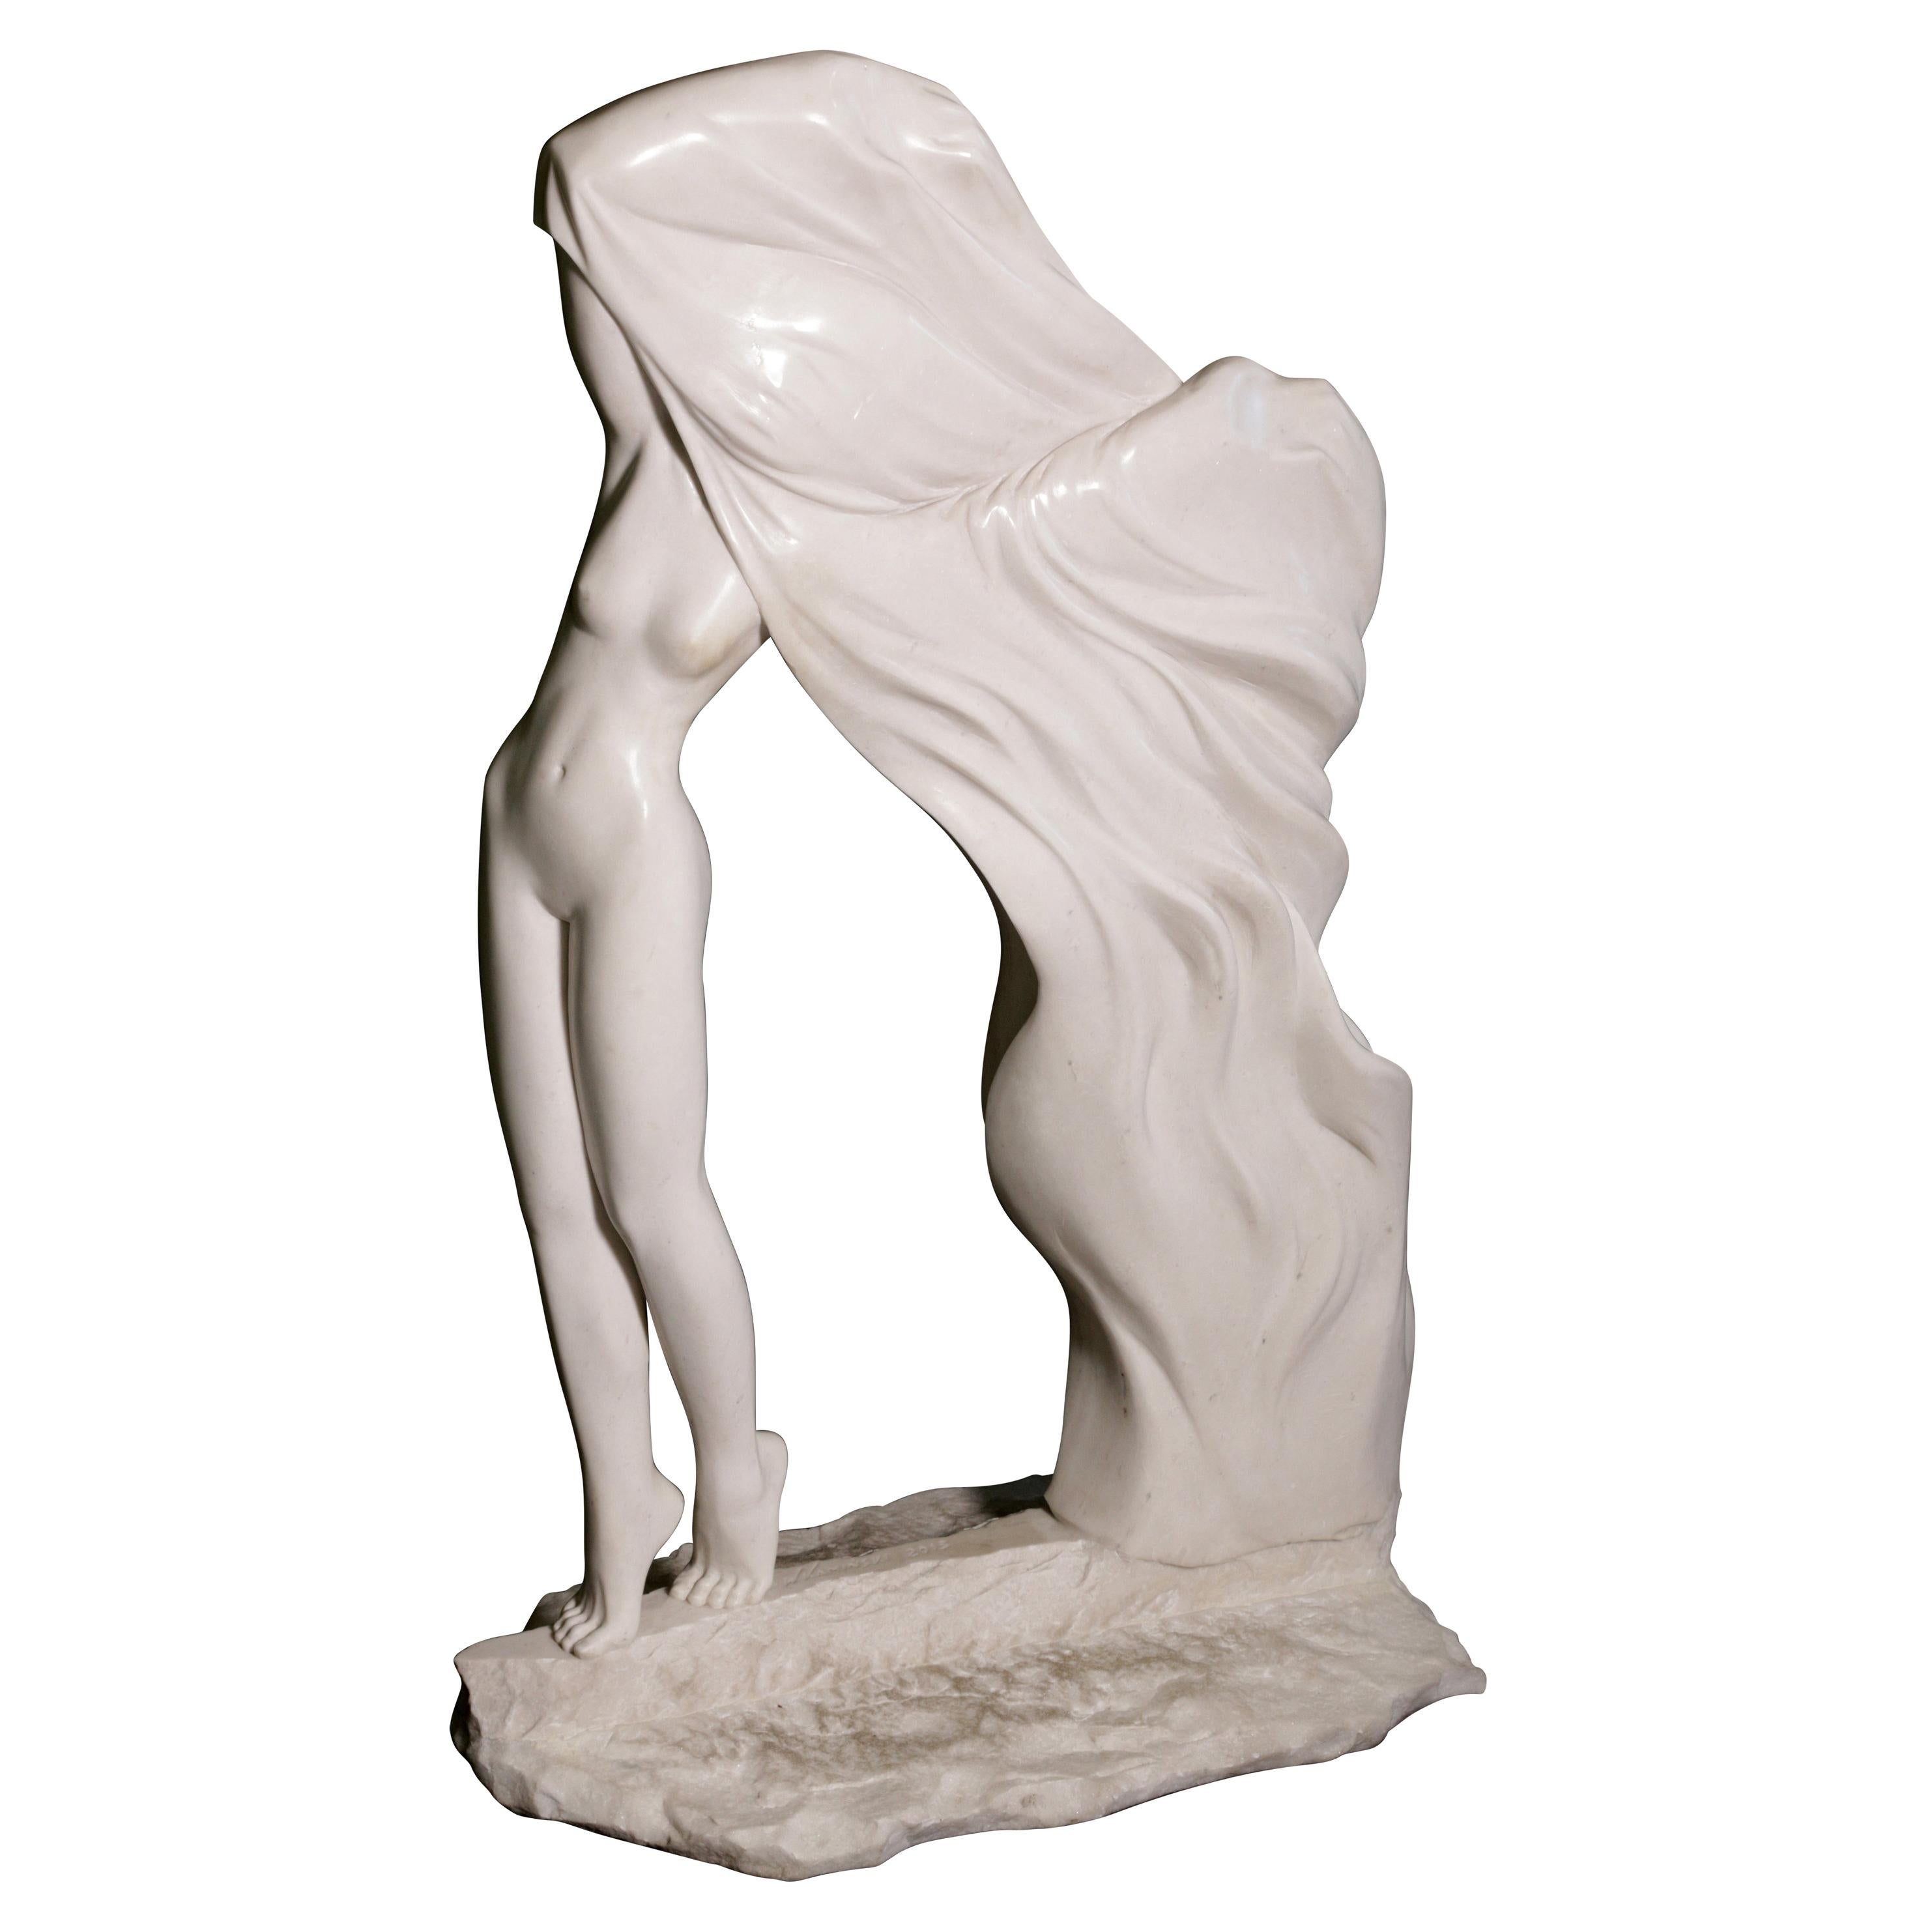 "CHAIN" Phase II, Hand-Crafted White Polished Marble Sculpture For Sale